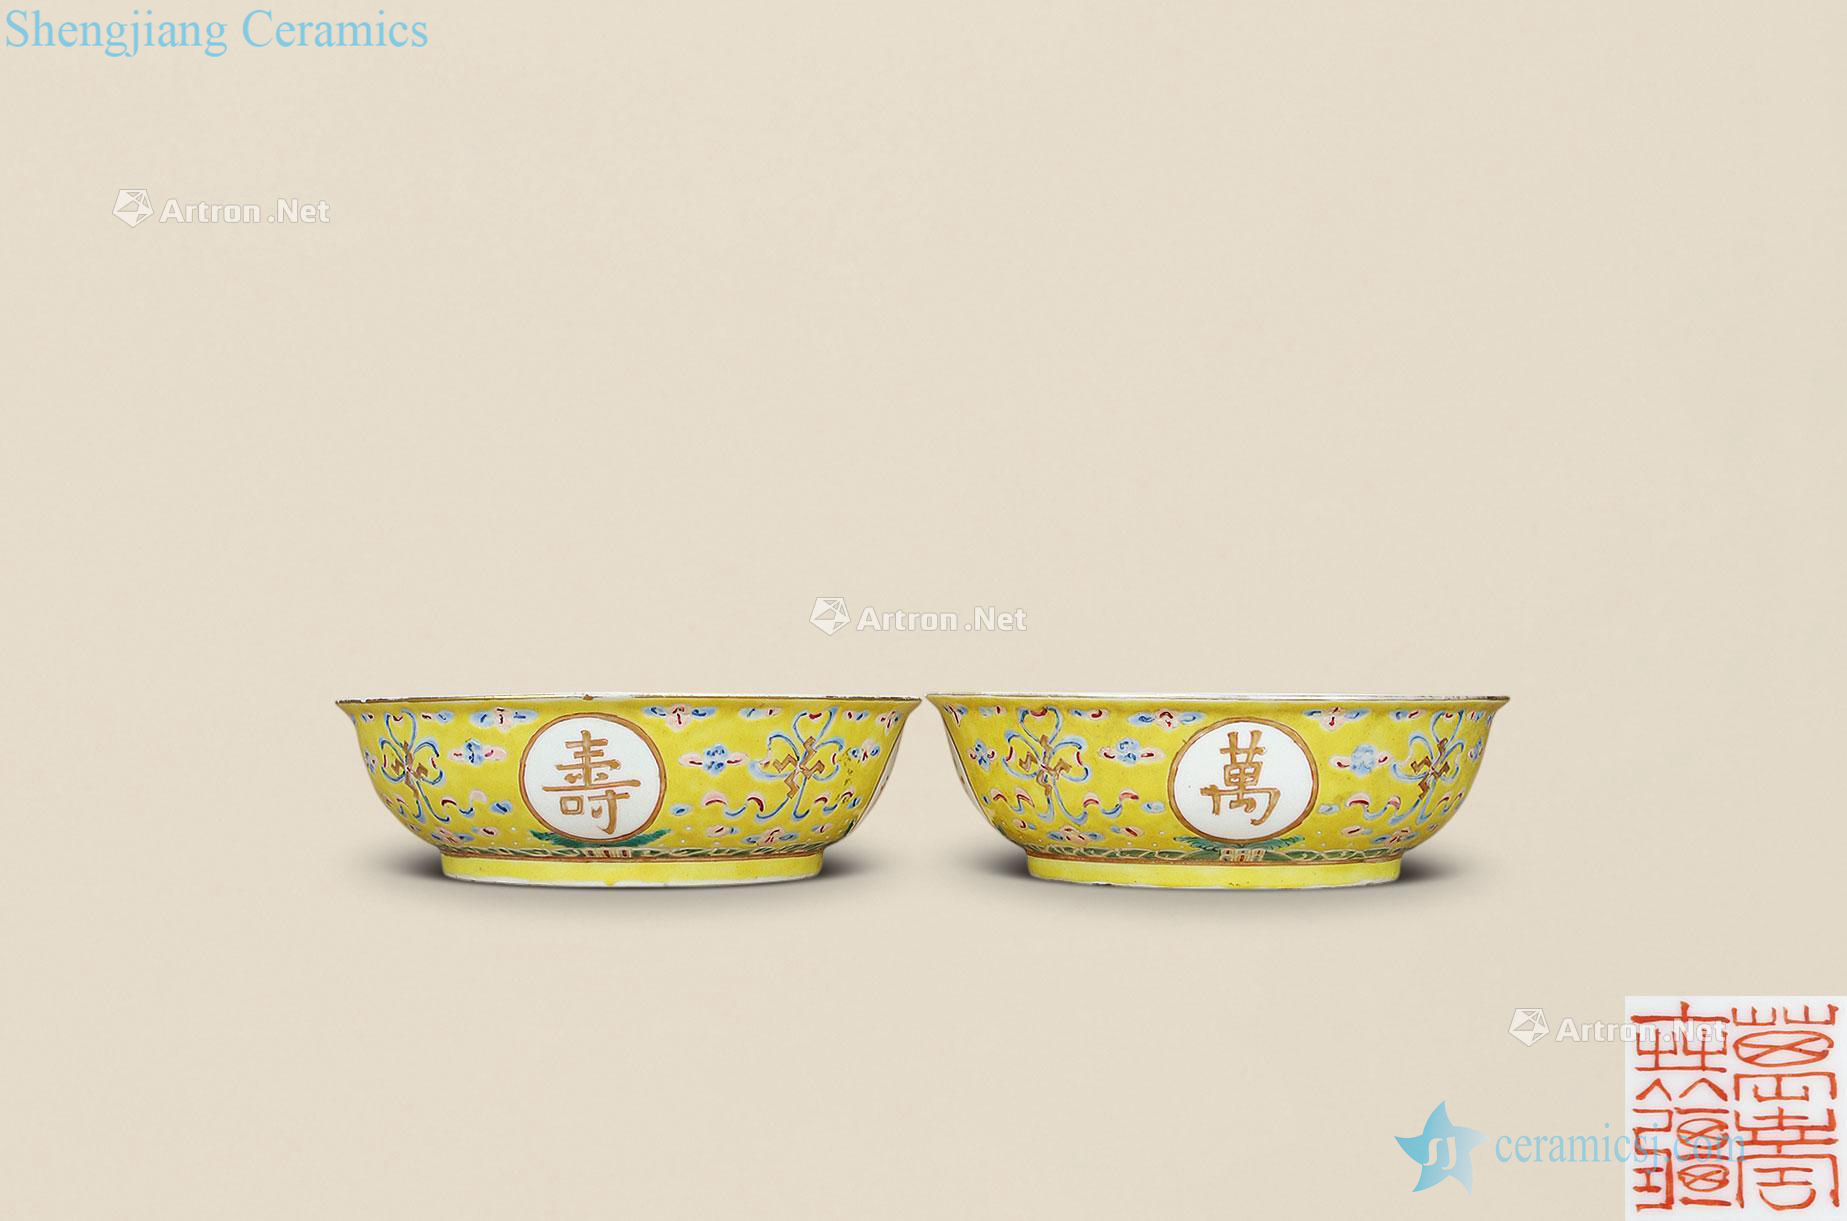 Pastel reign of qing emperor guangxu stays in grain shallow bowl (a)